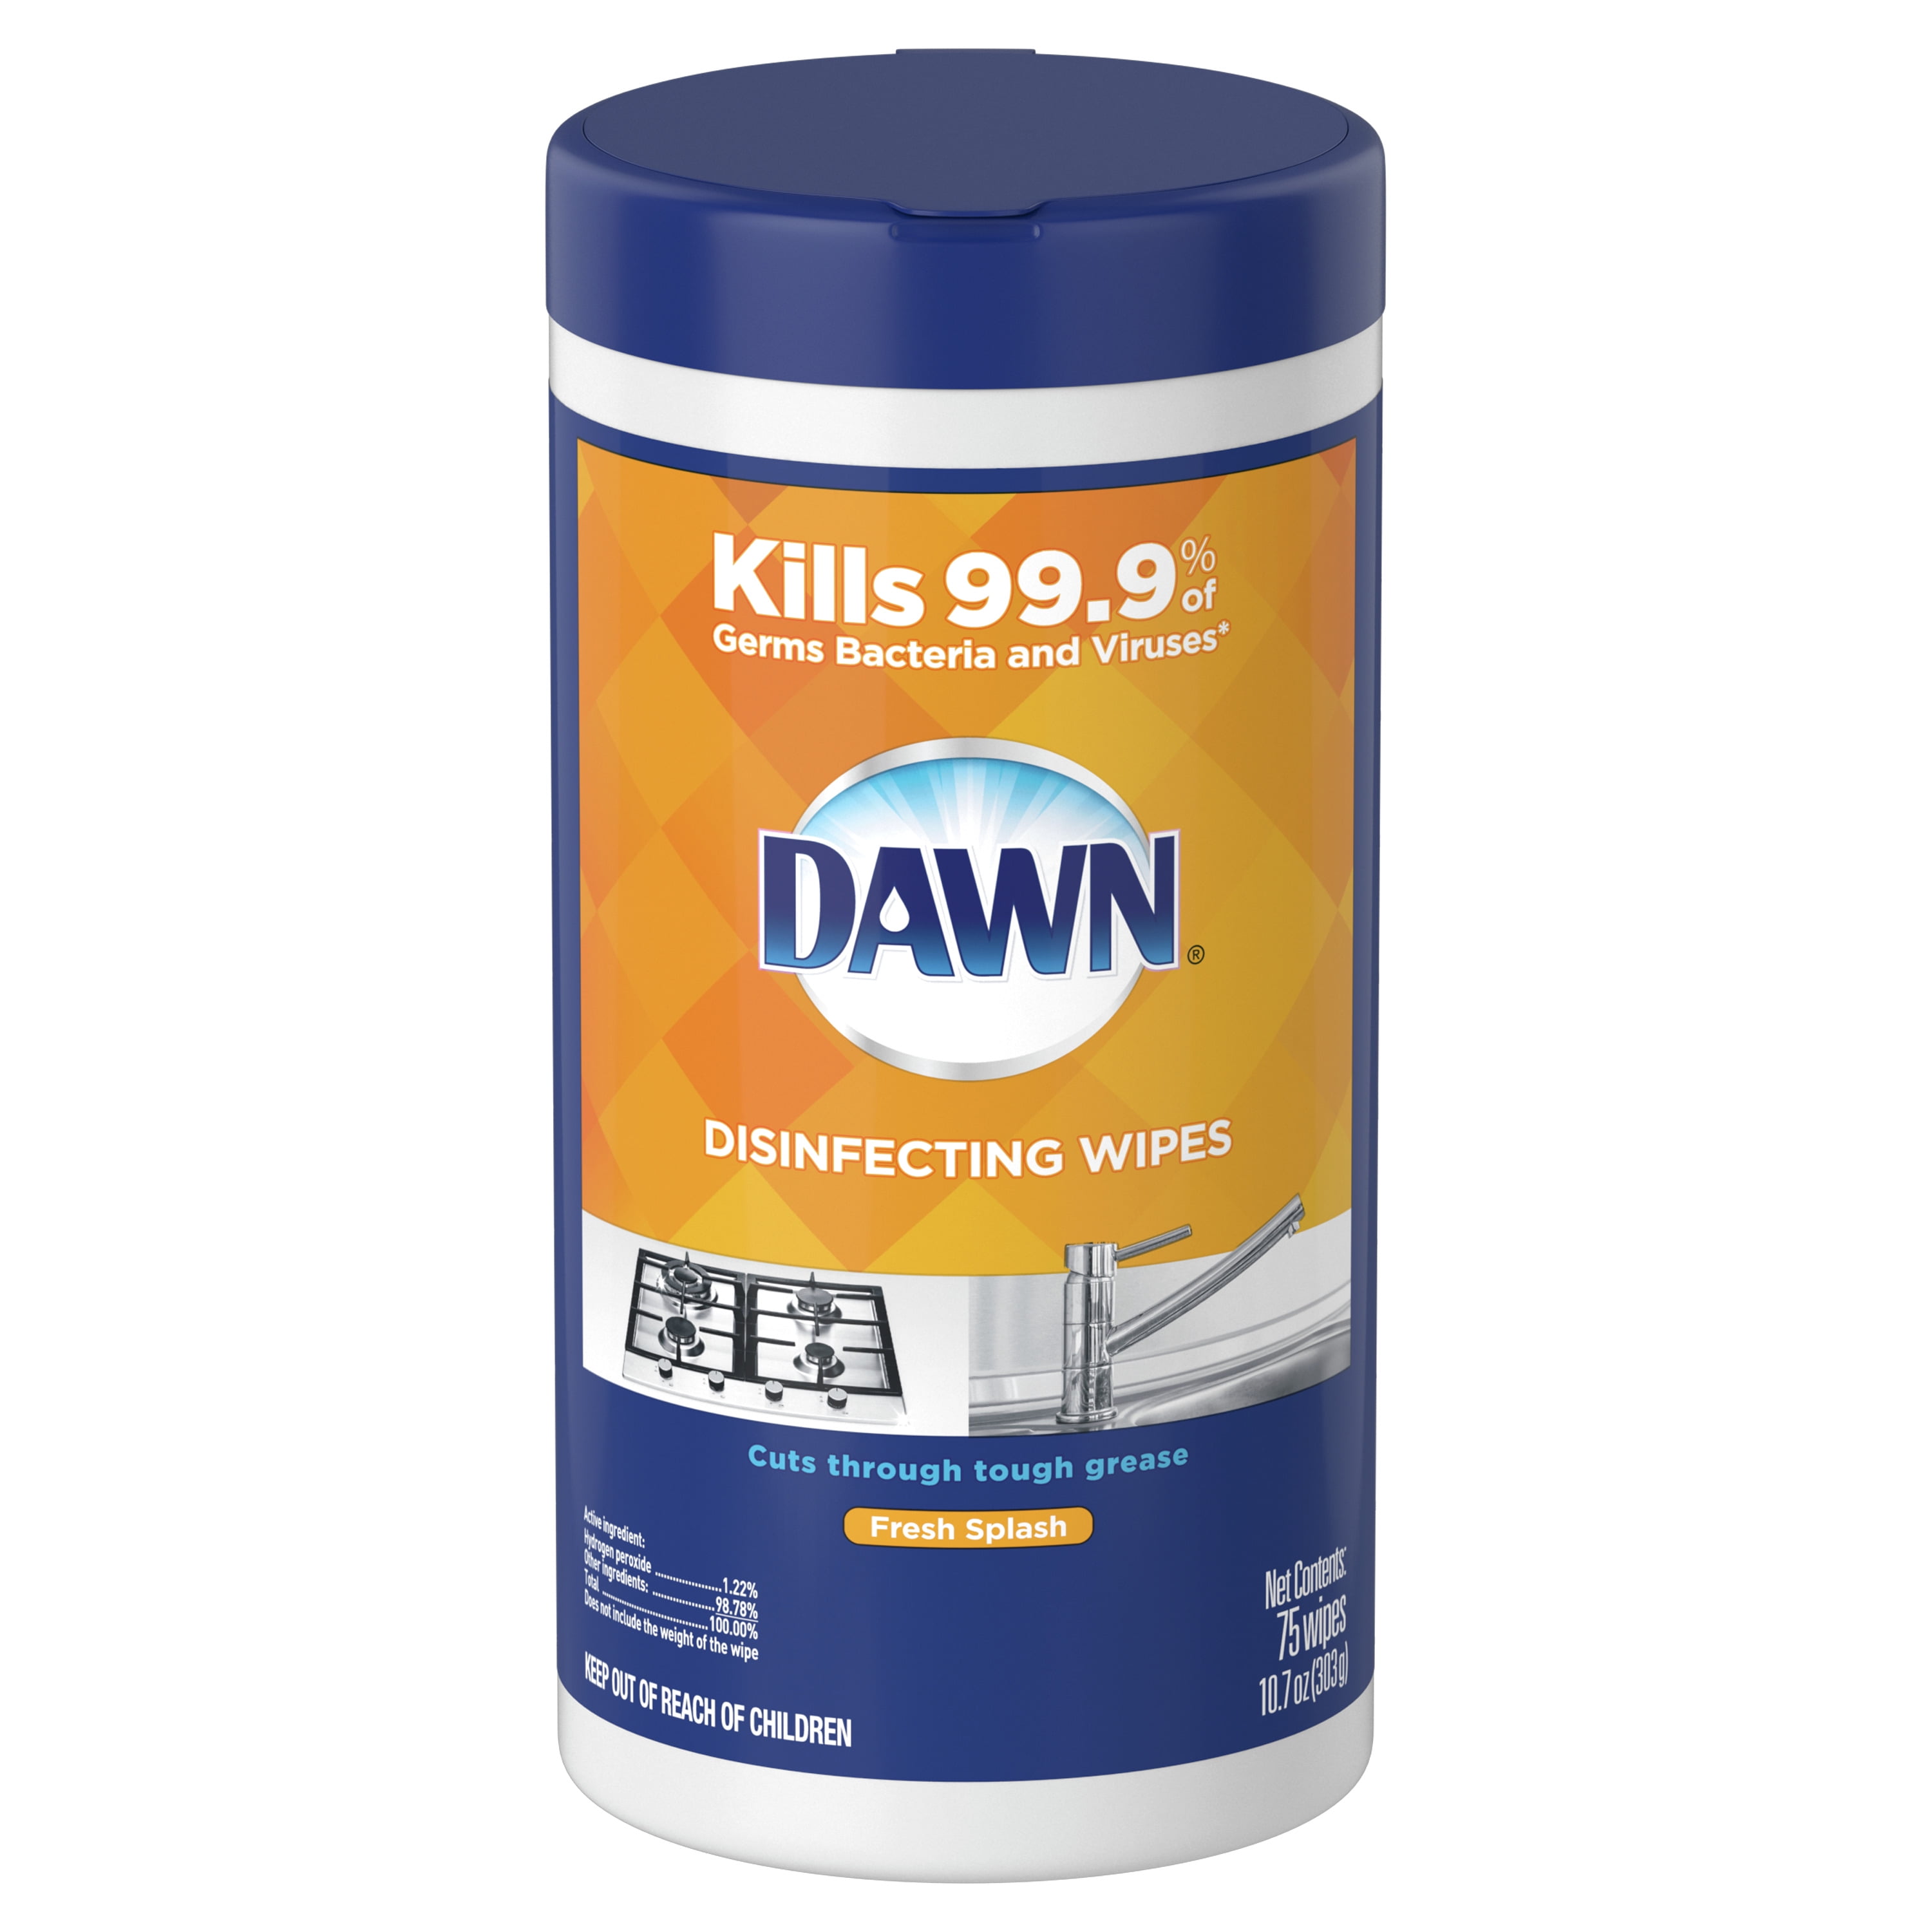 Dawn Disinfecting Wipes, Fresh Scent, 75 Count